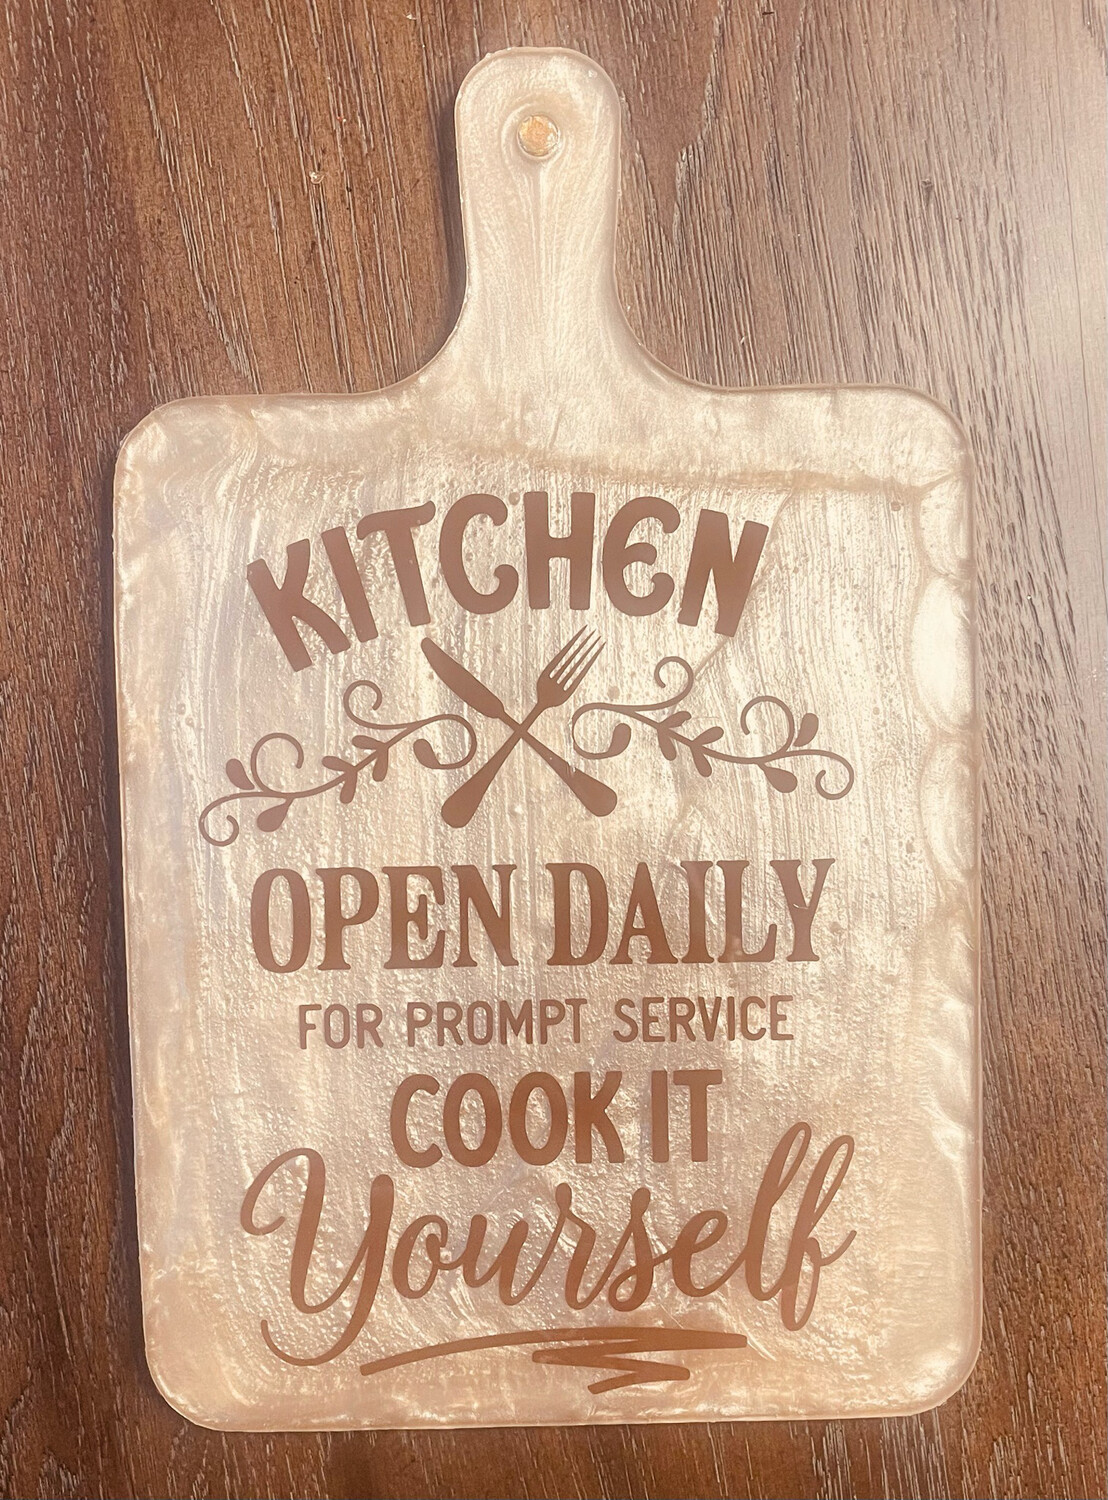 Kitchen Opened Daily